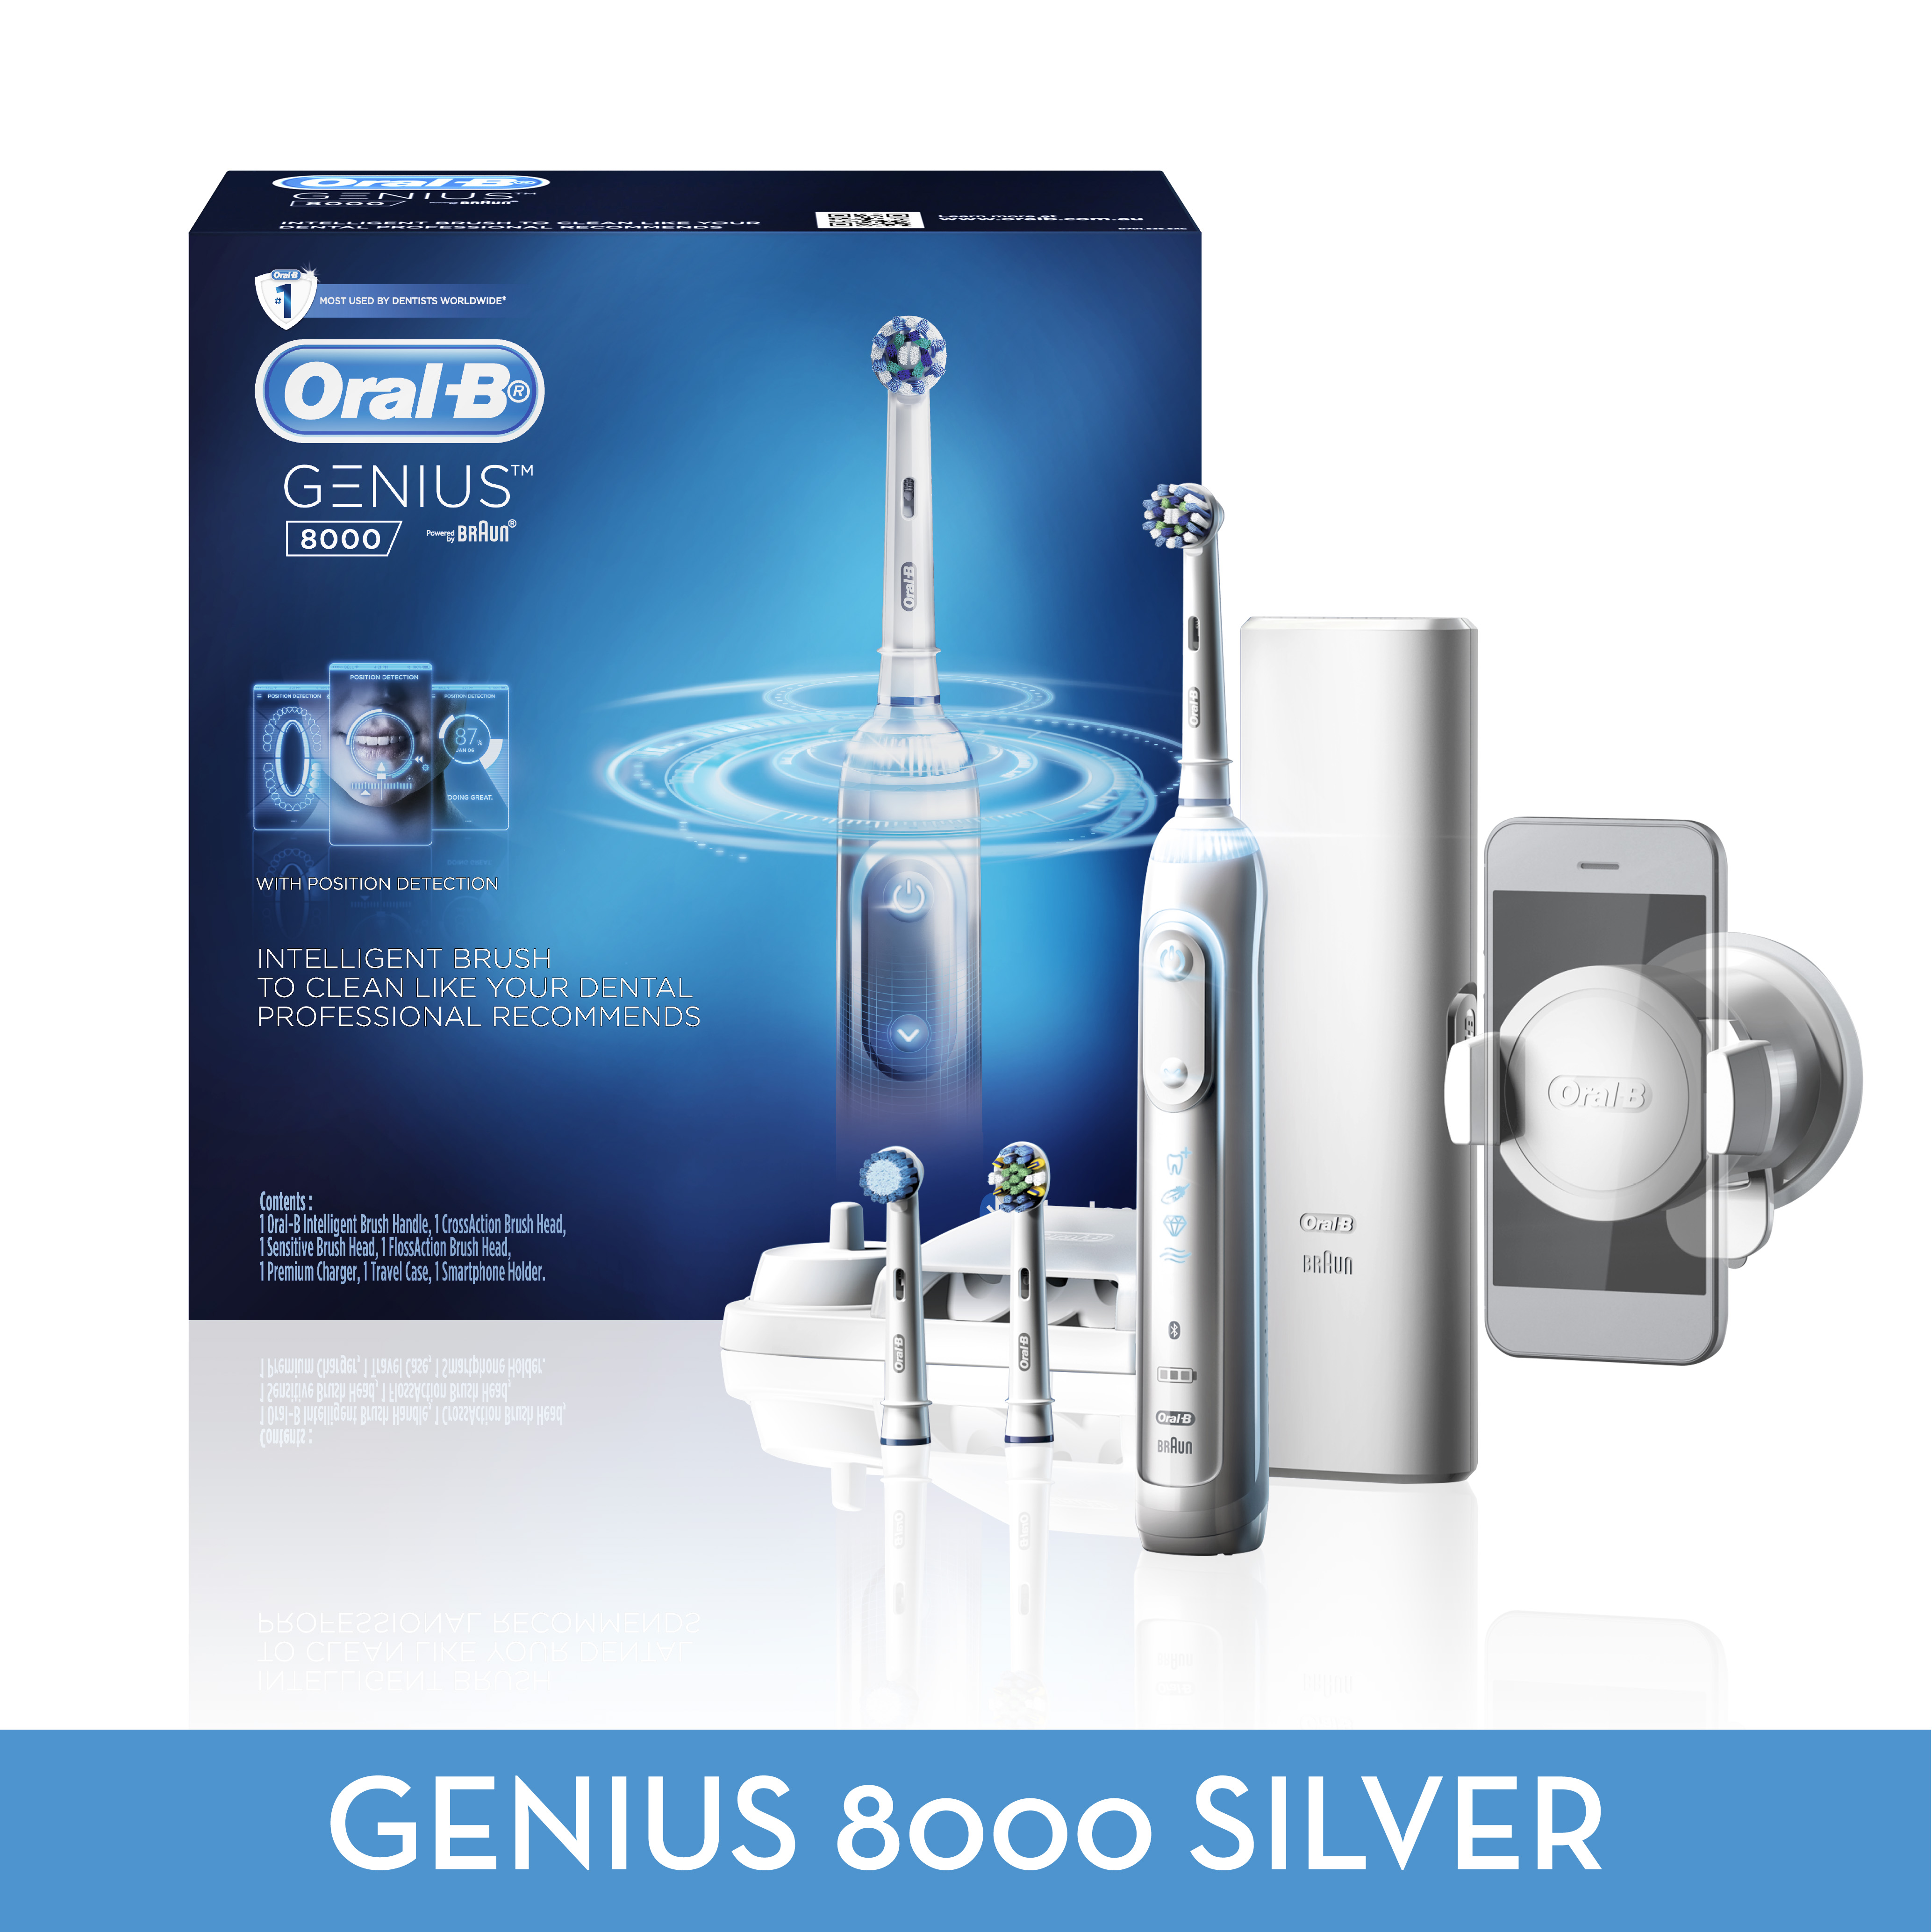 Oral-B GENIUS 8000 Electric Rechargeable Toothbrush